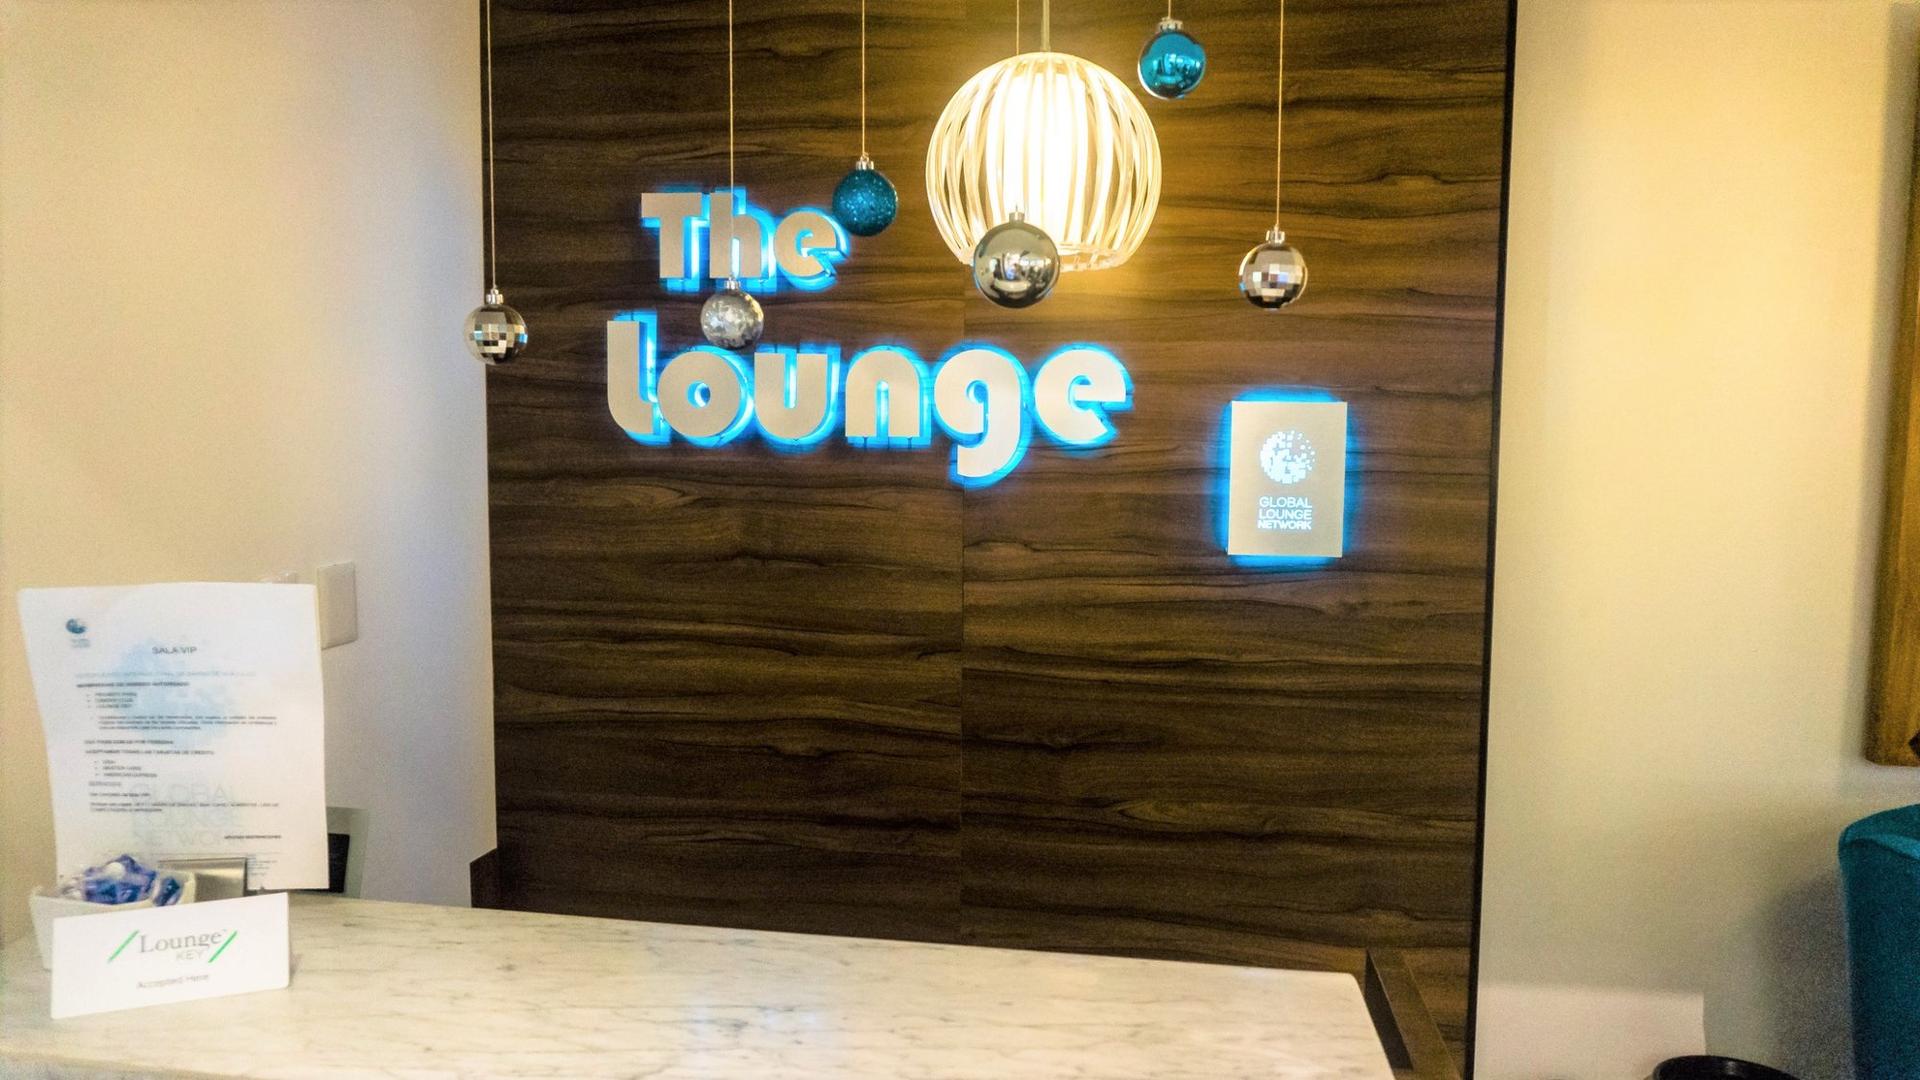 The Lounge By Global Lounge Network image 14 of 19